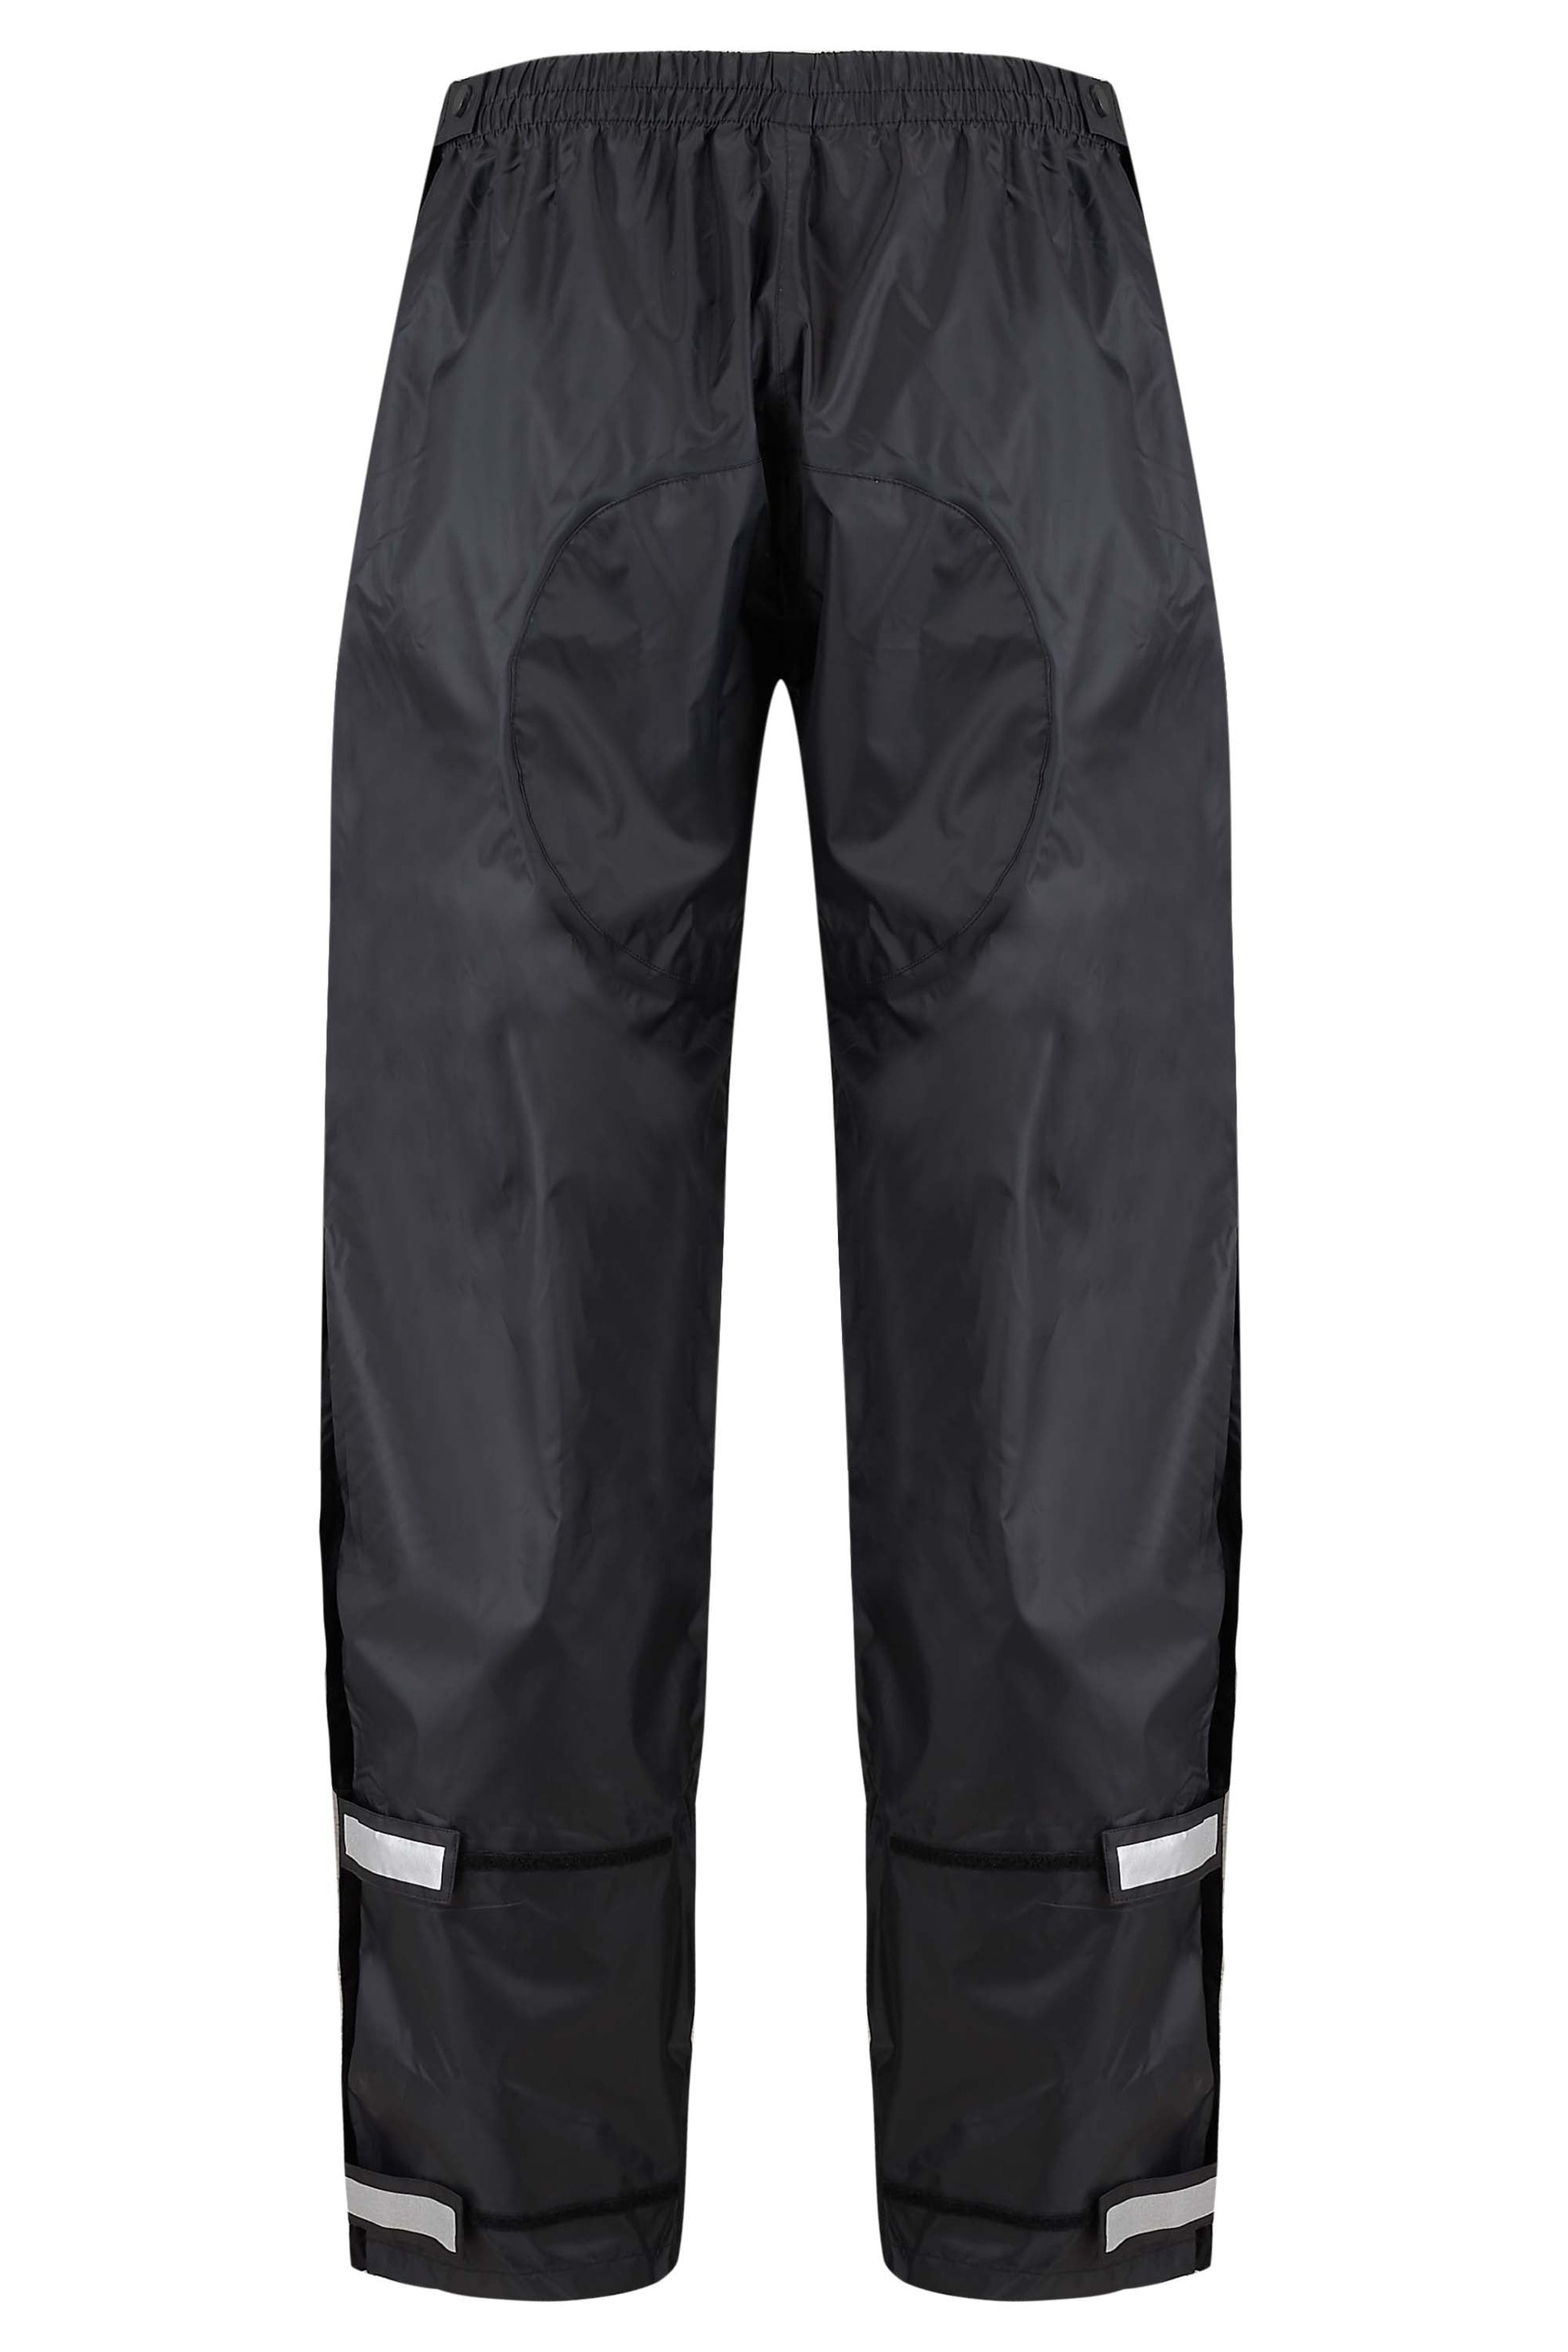 Mac In A Sac Full Zip 2 Packable Overtrouser - Black